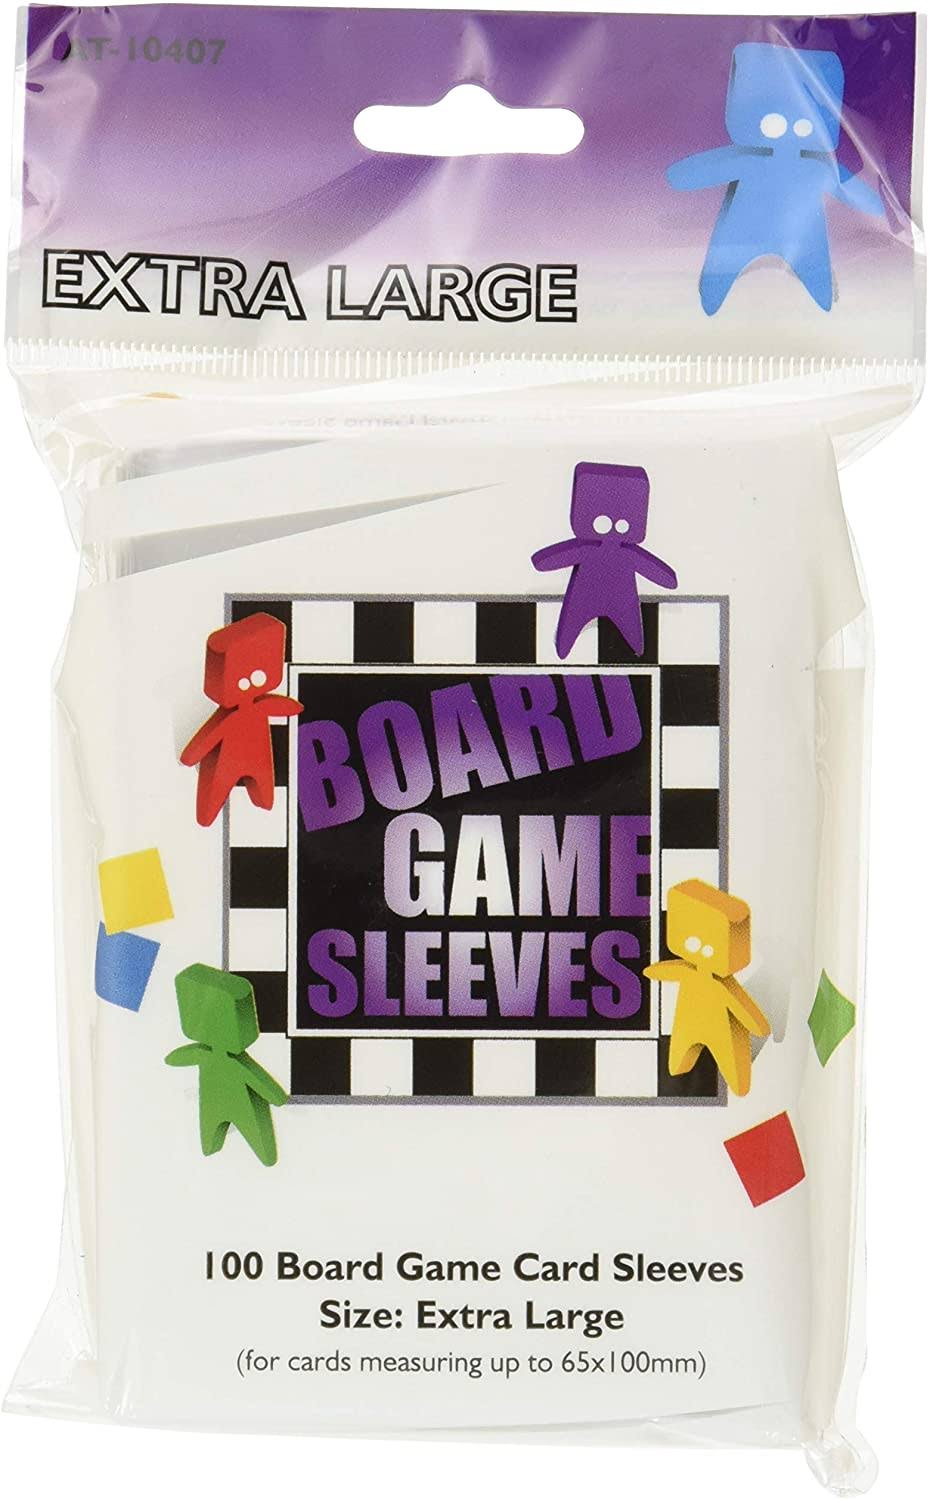 Board Game Card Sleeves - 65mm x 100mm, 100 ct